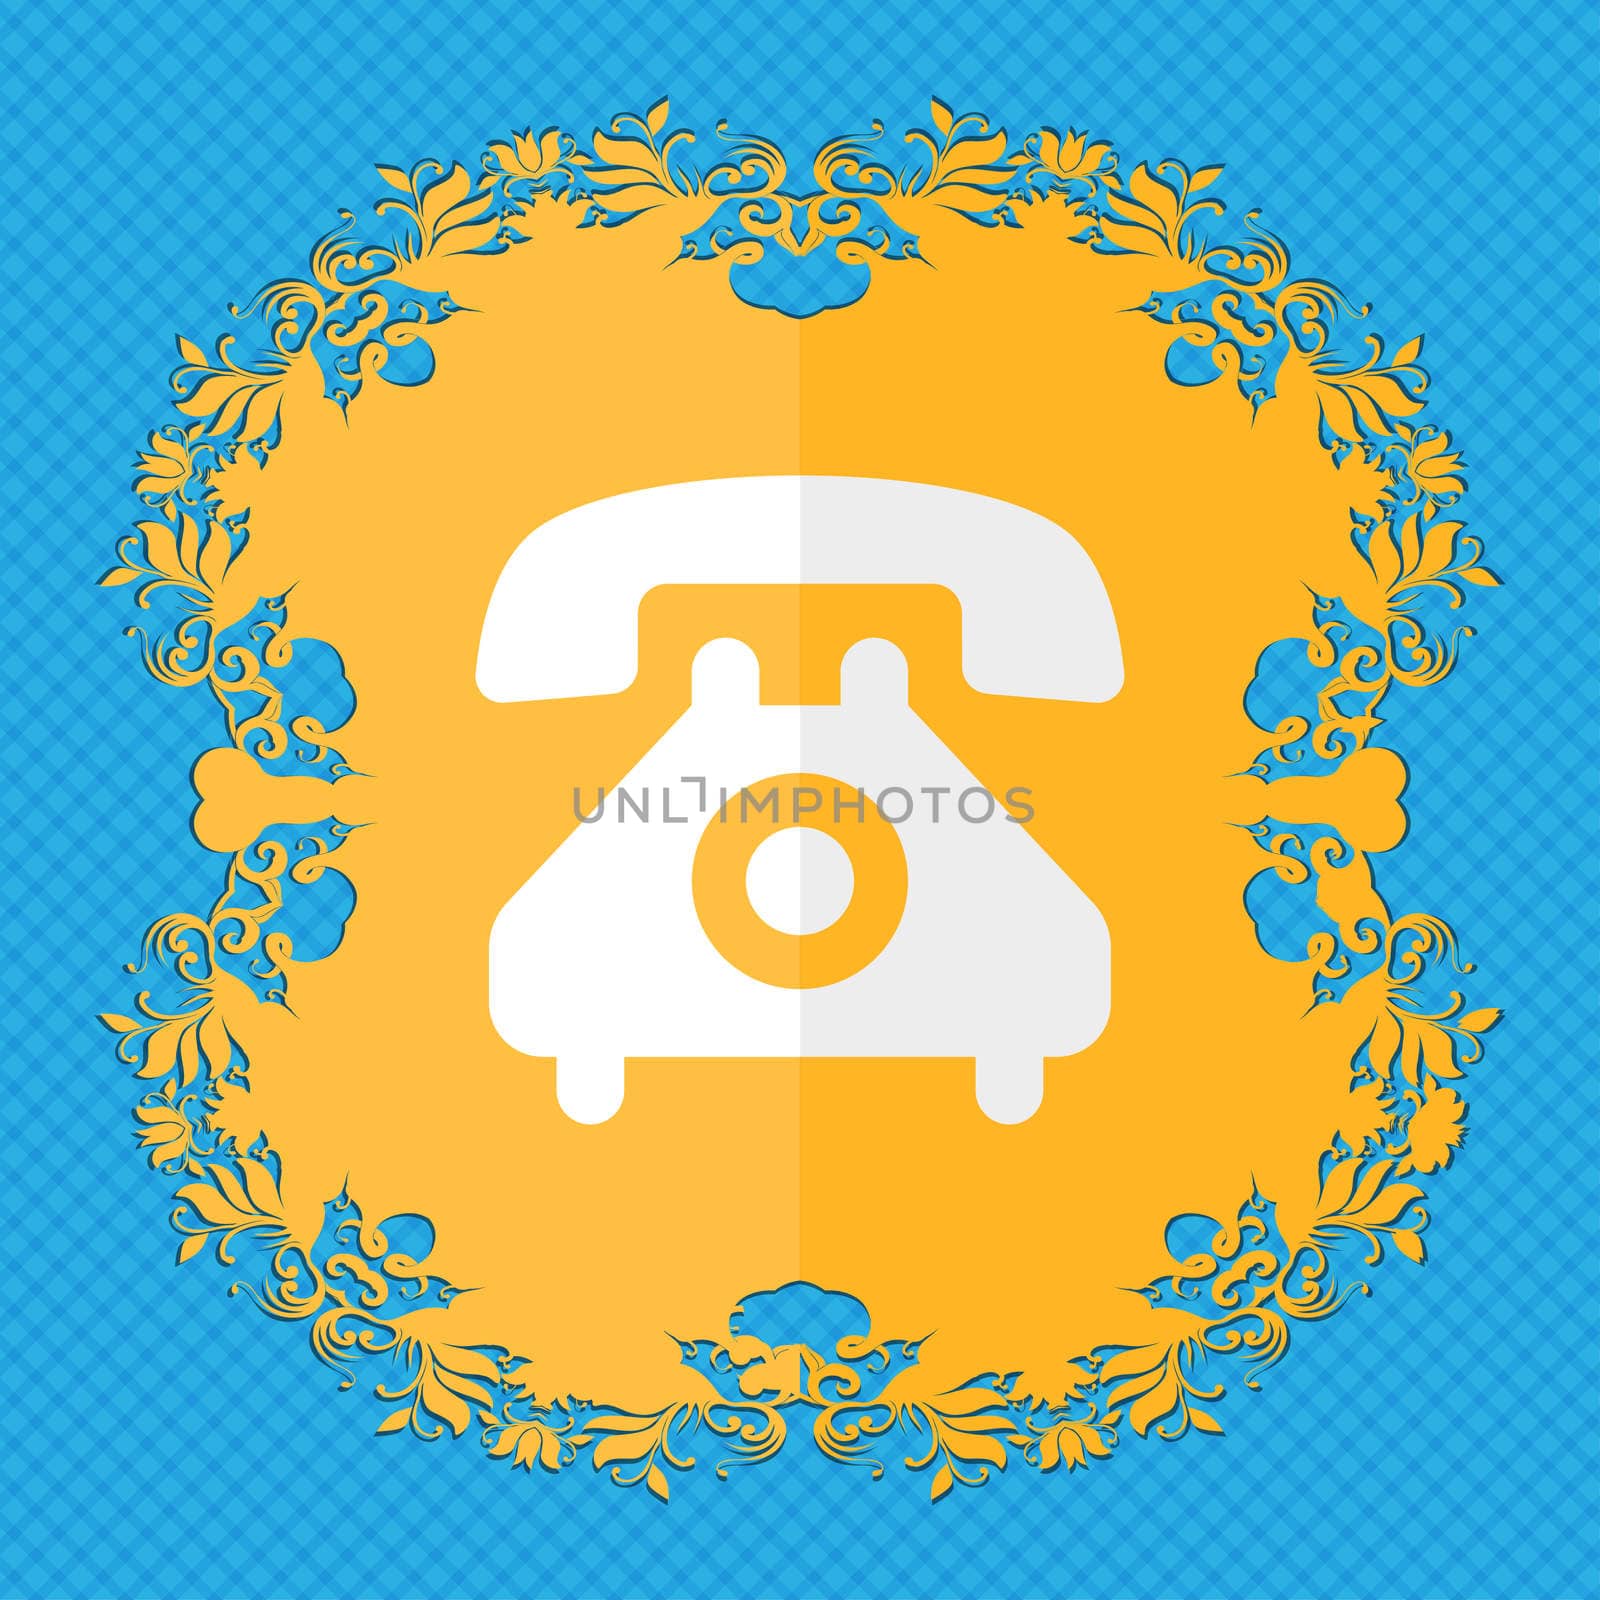 retro telephone handset. Floral flat design on a blue abstract background with place for your text. illustration